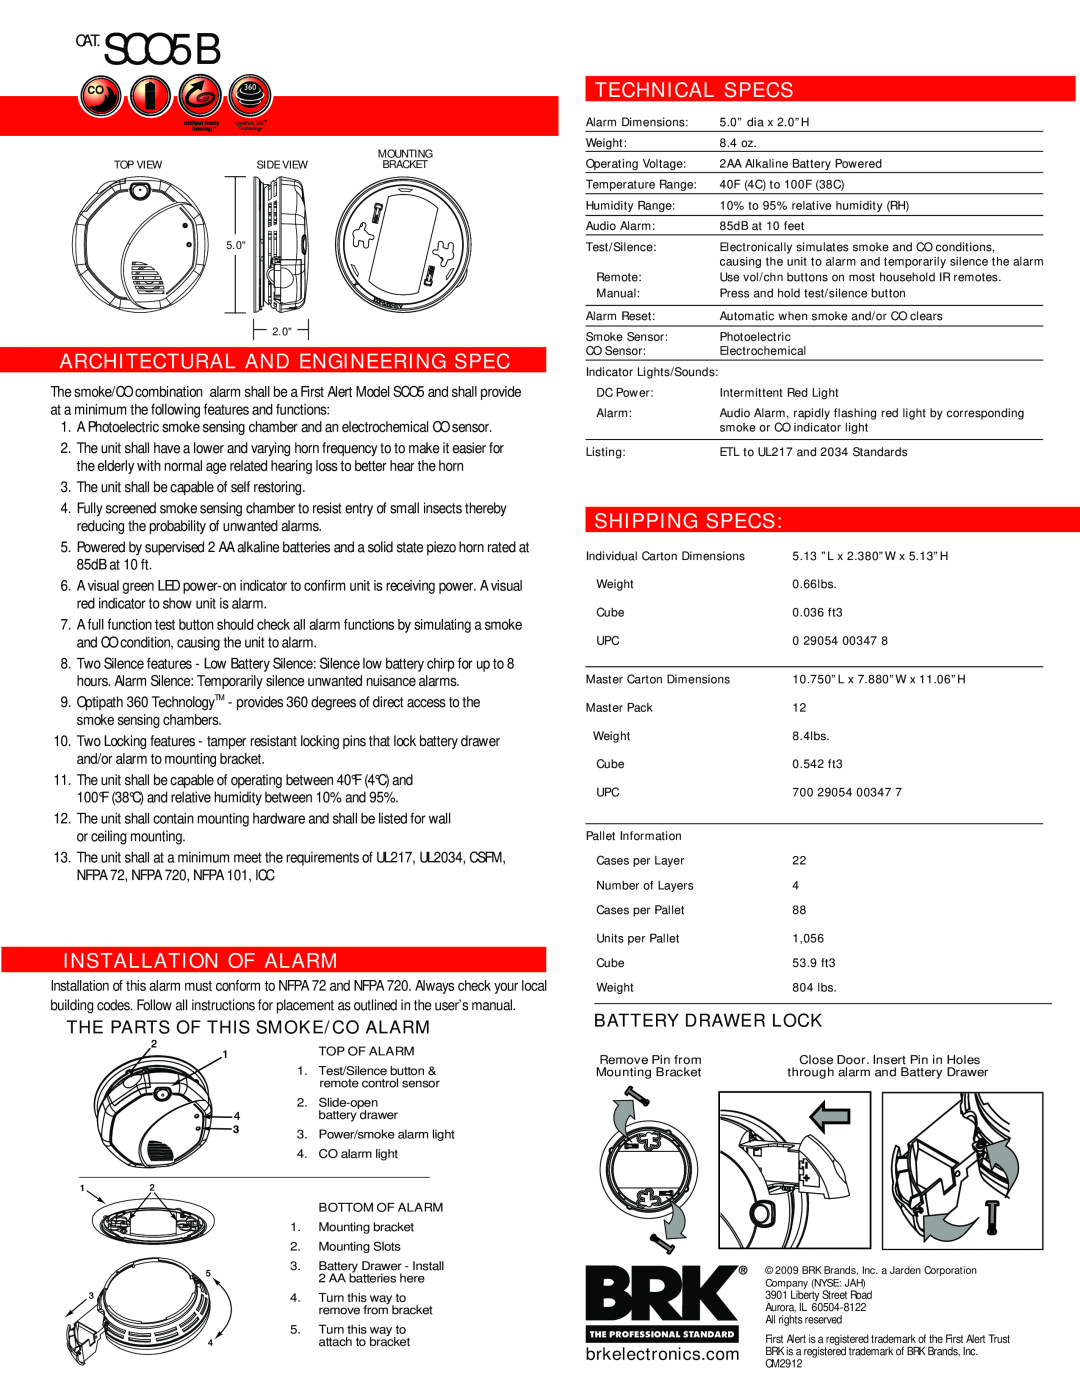 First Alert SC05B Architectural And Engineering Spec, Installation Of Alarm, Technical Specs, Shipping Specs, CAT.SCO5B 